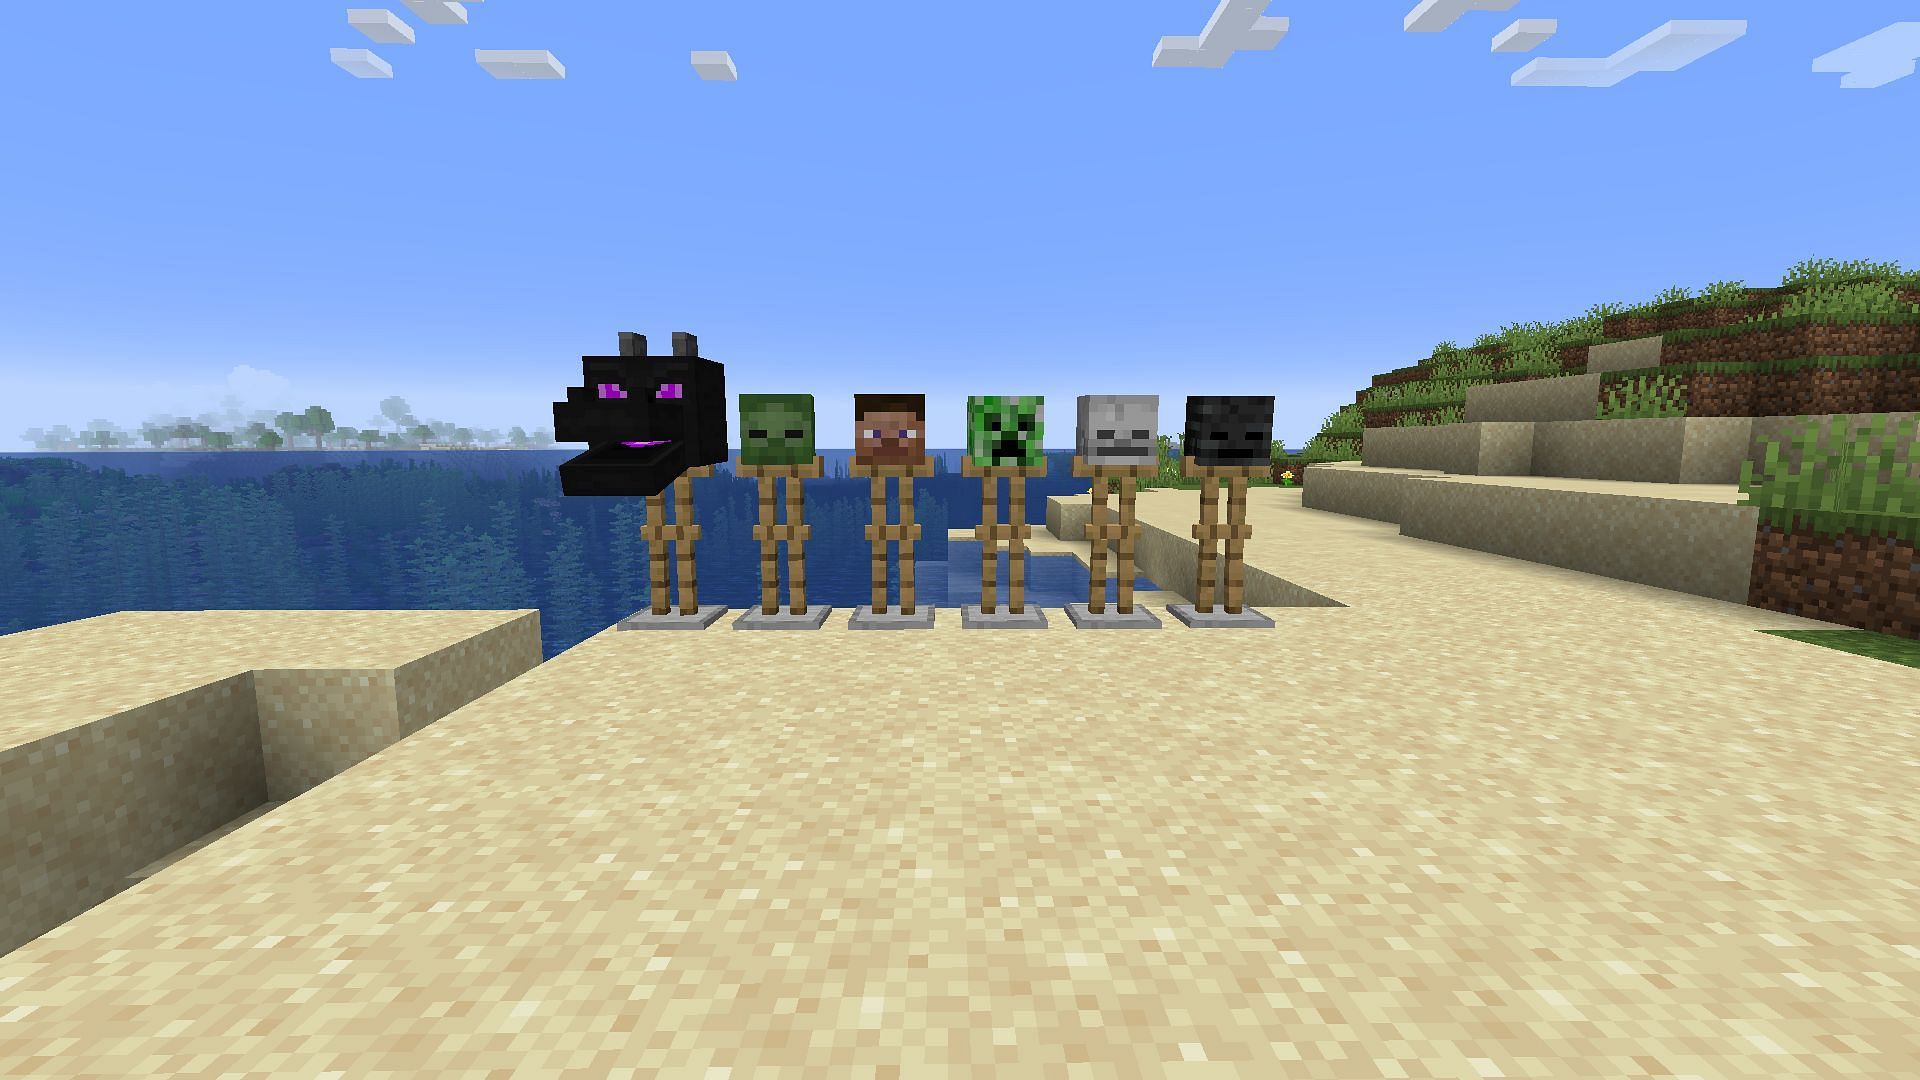 All the mob heads on armor stands (Image via Minecraft)